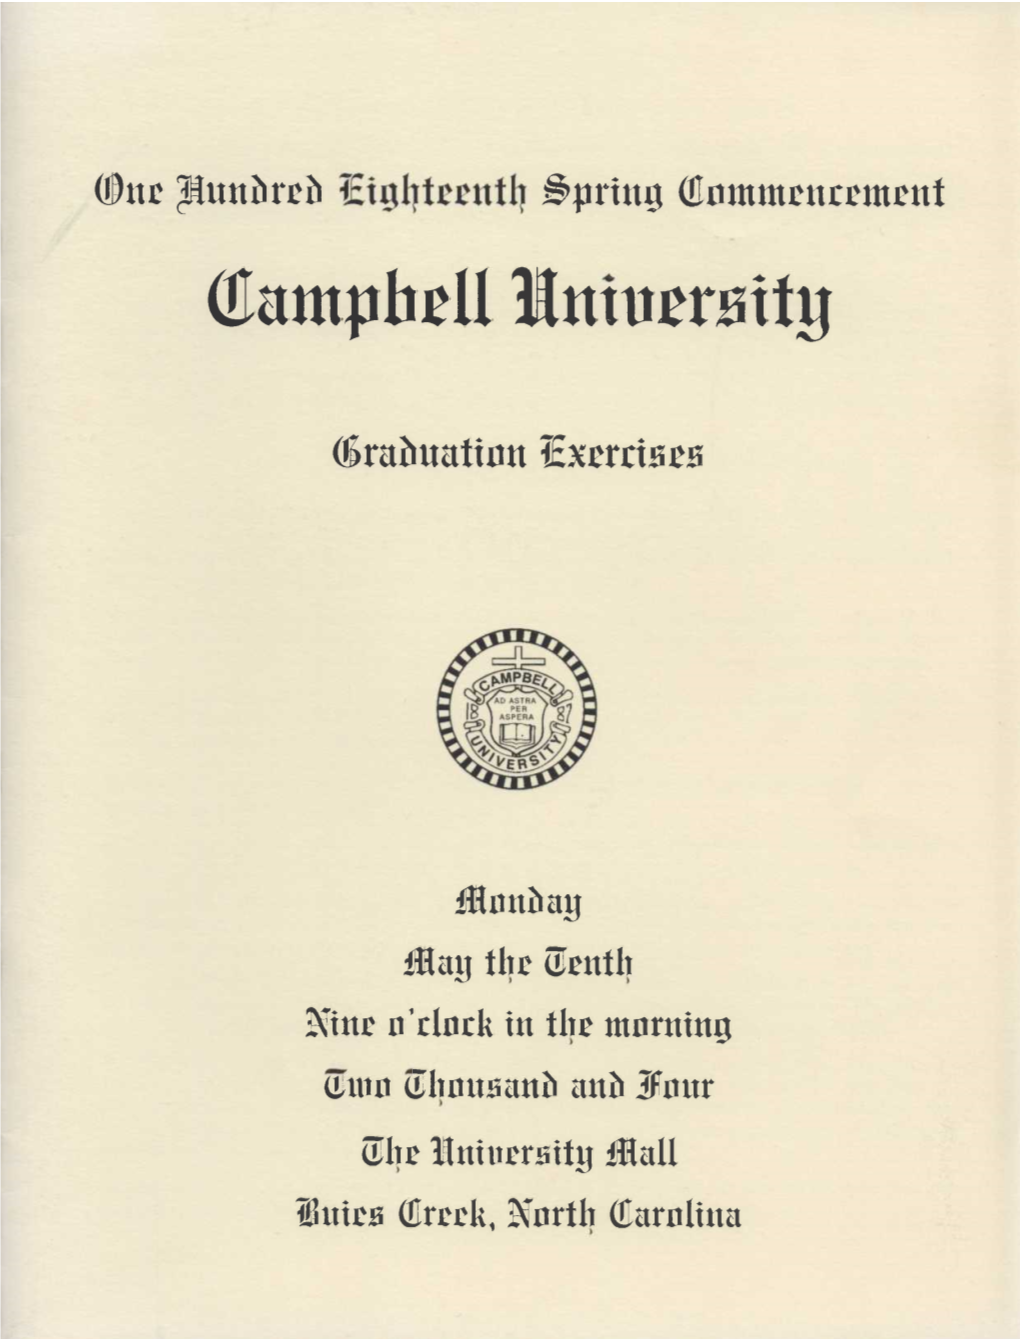 One Hundred Eighteenth Spring Commencement (2004)